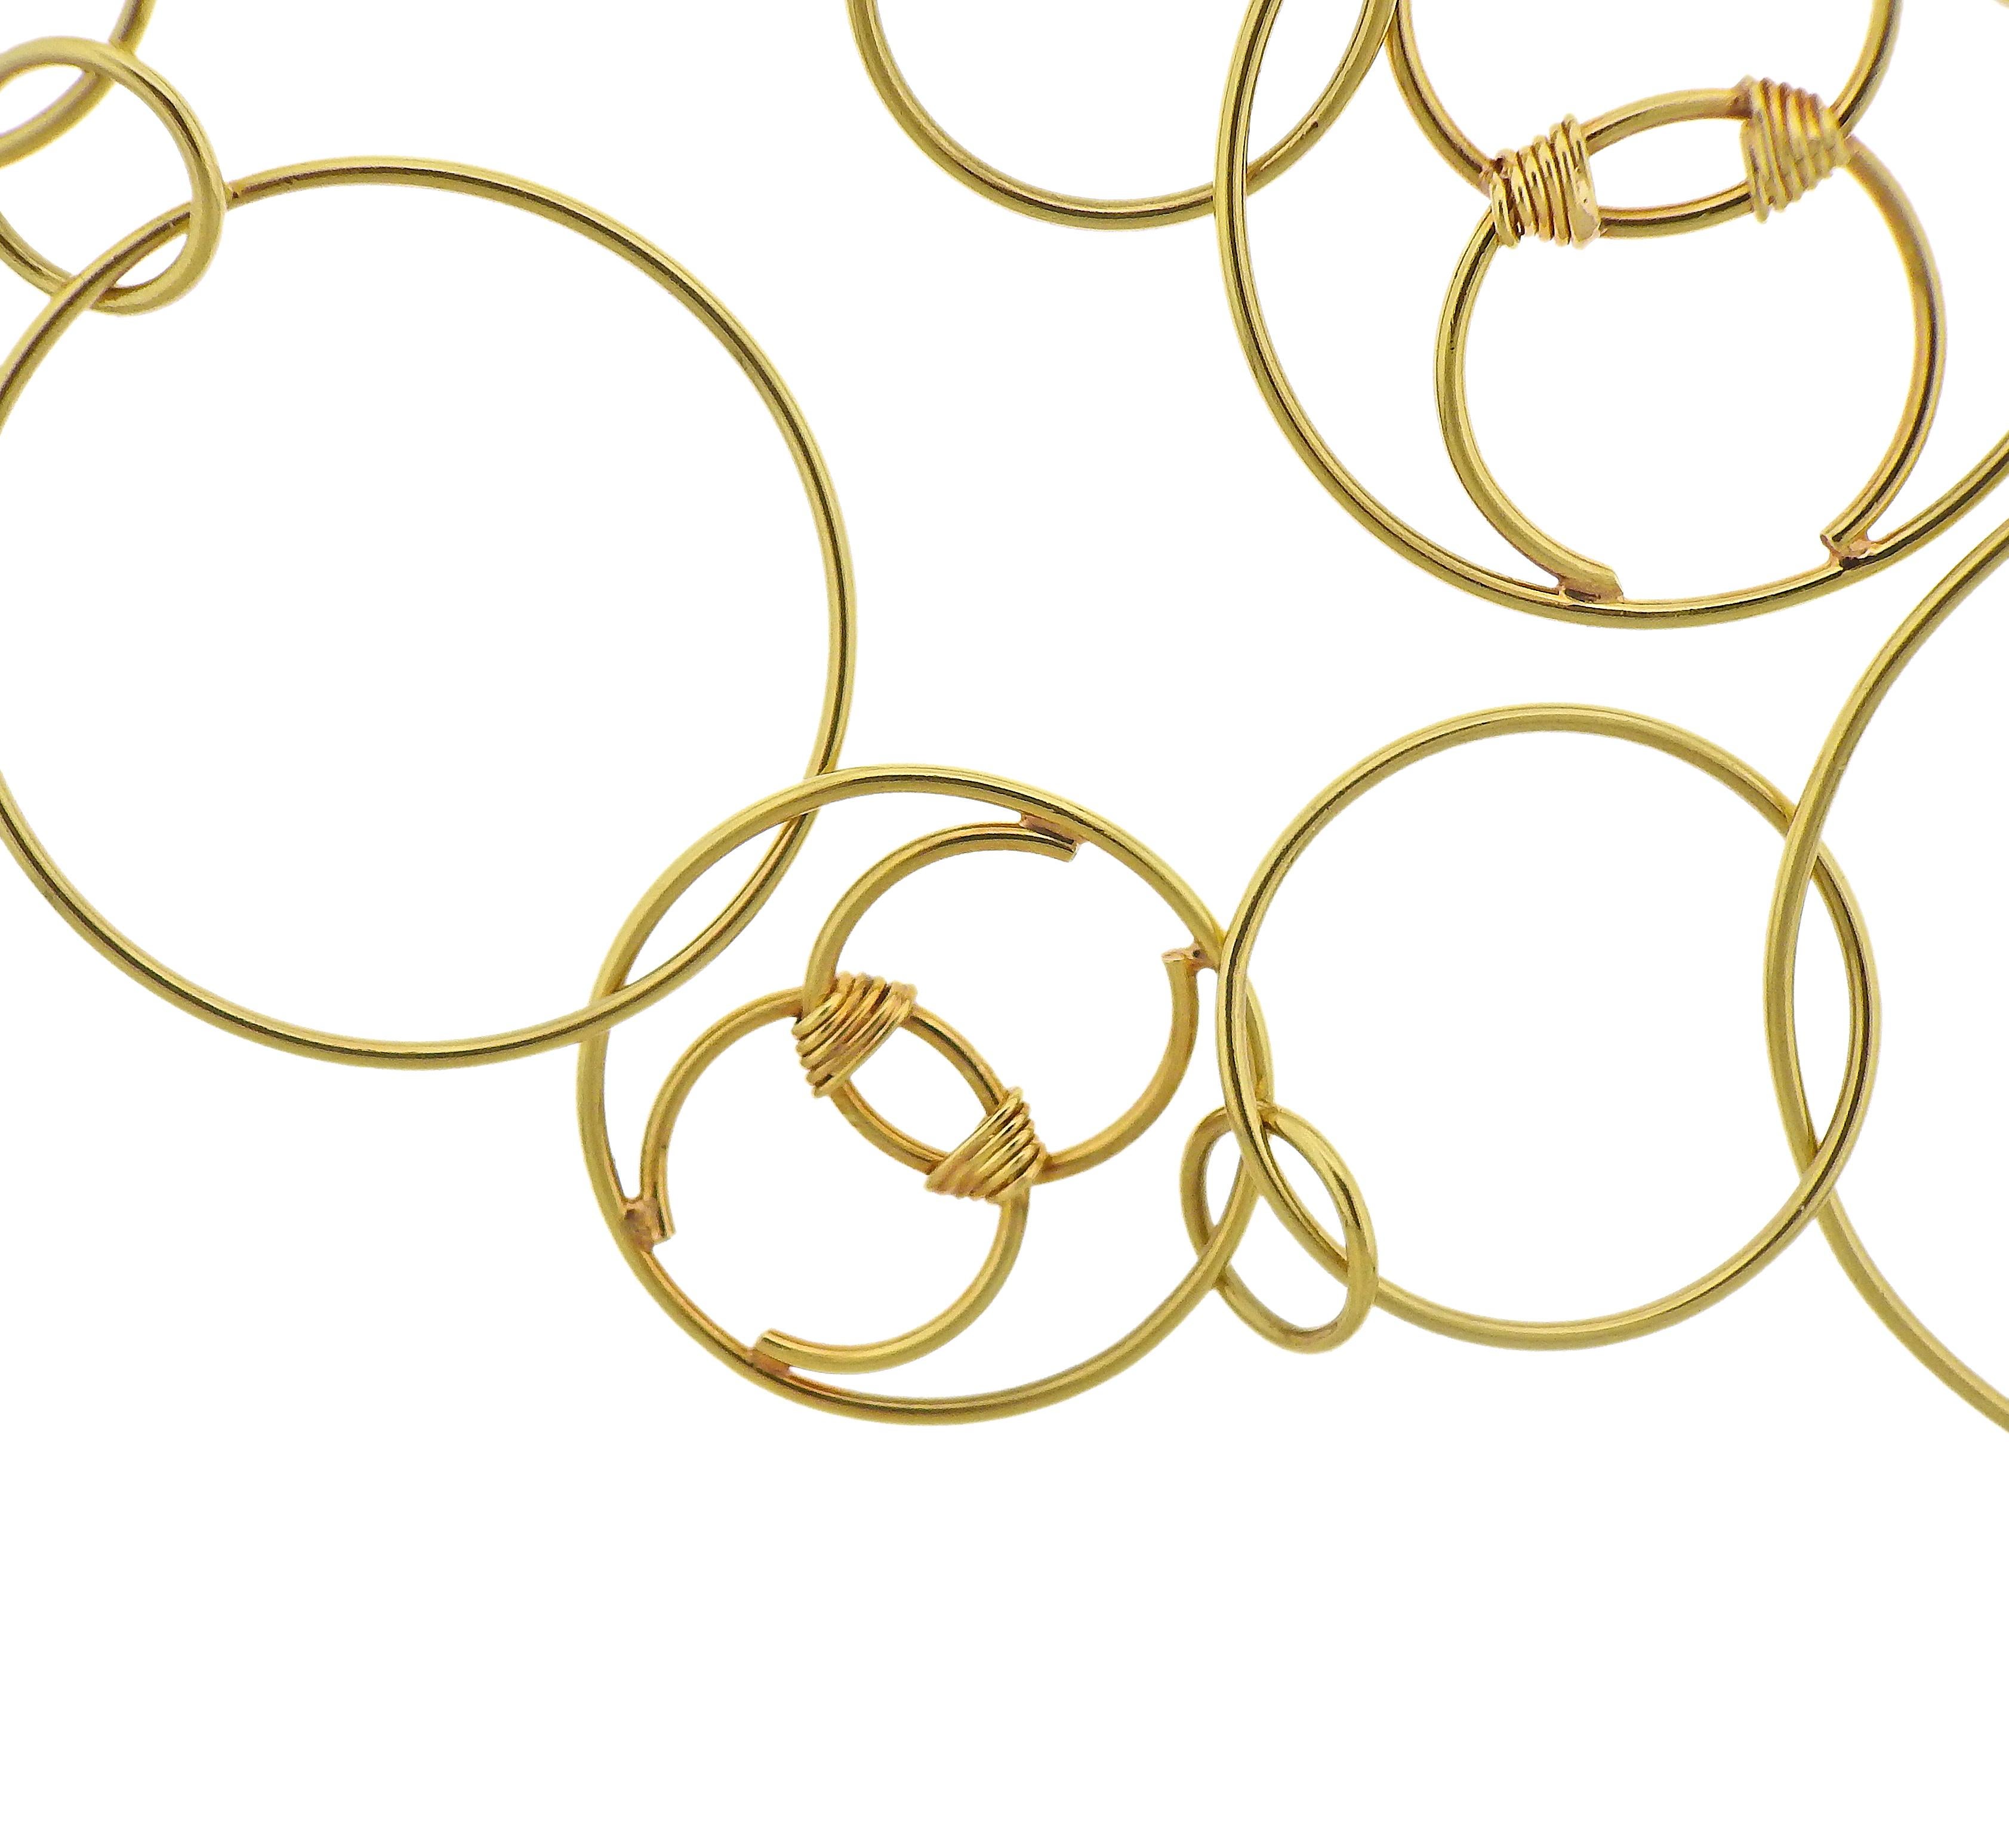 Long 18k yellow gold multi circle link necklace by Chane, with CC elements. Necklace is 36